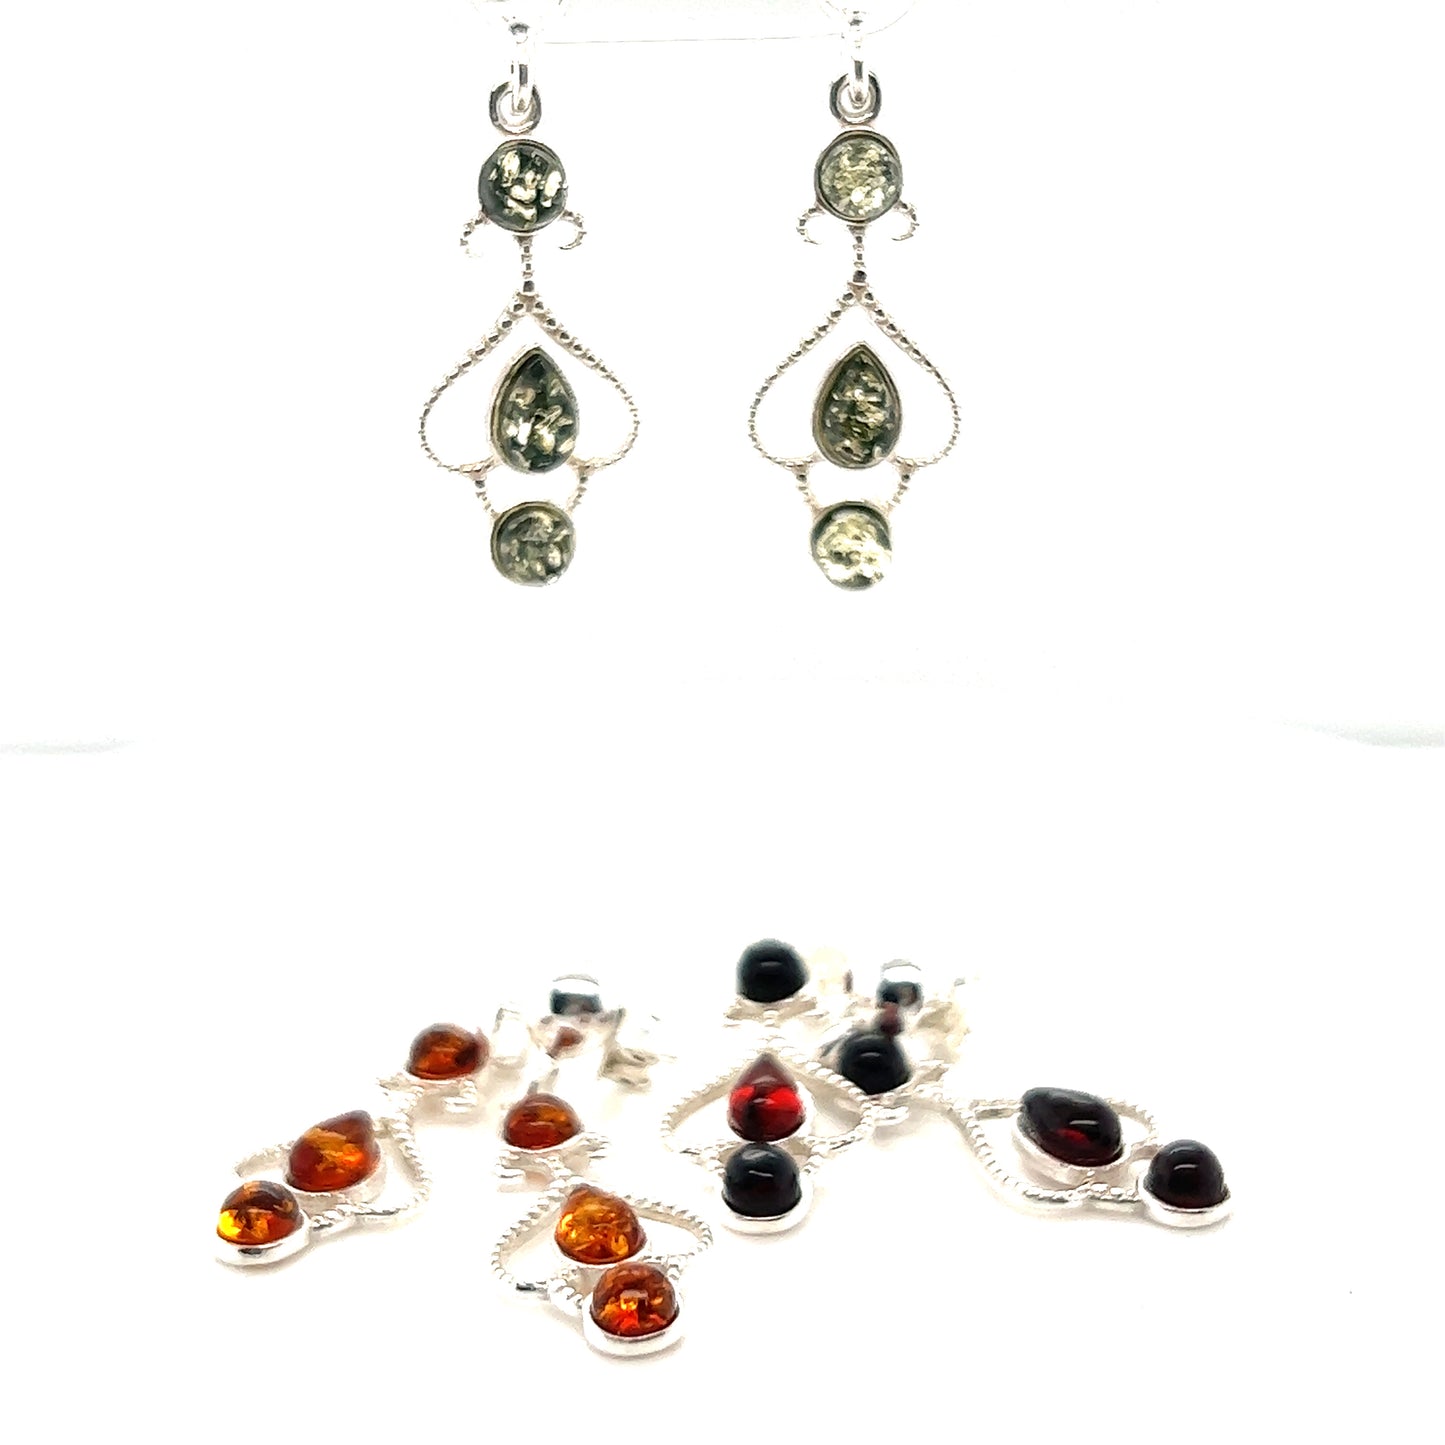 A pair of Exquisite Baltic Amber Scroll Earrings from Super Silver for a vintage look.